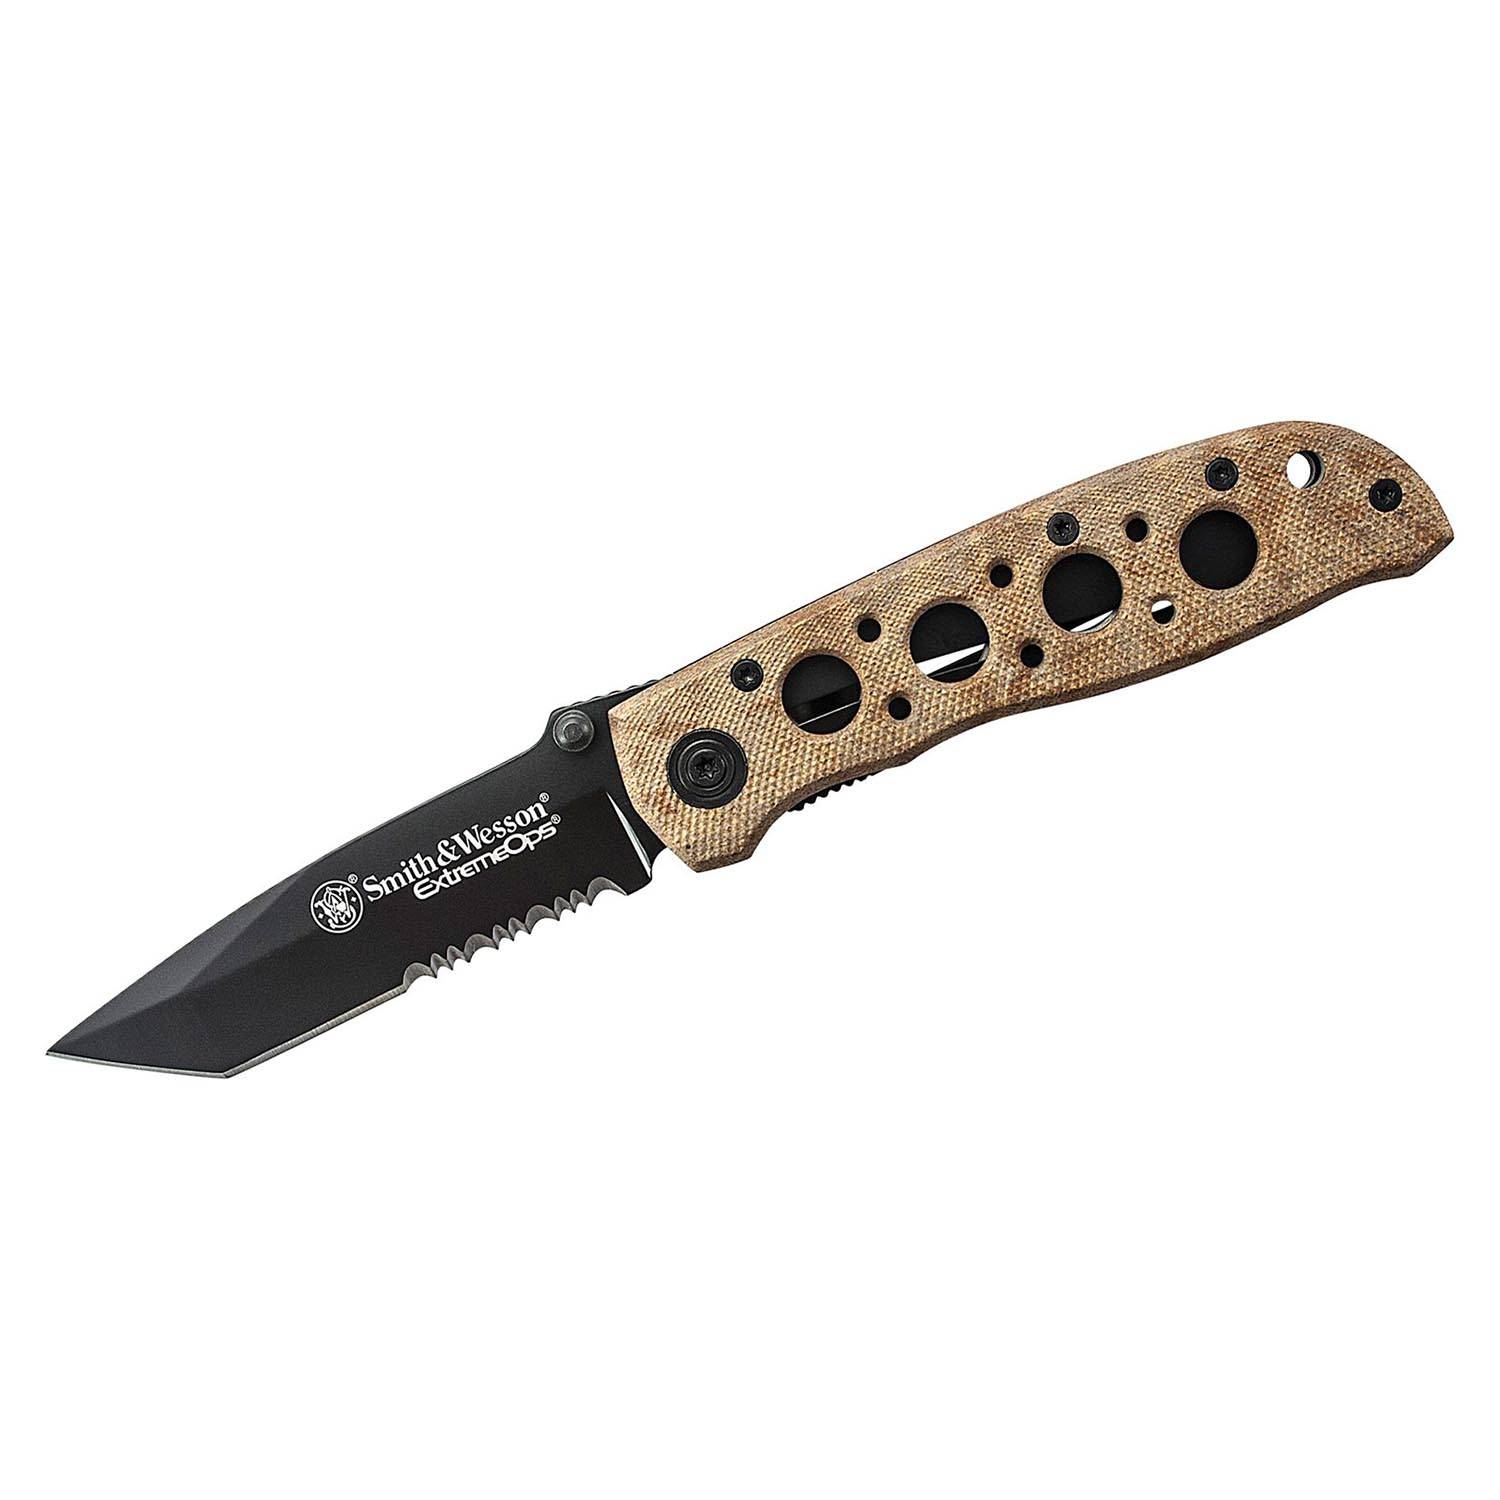 Smith & Wesson Extreme Ops Tanto Folding Knife